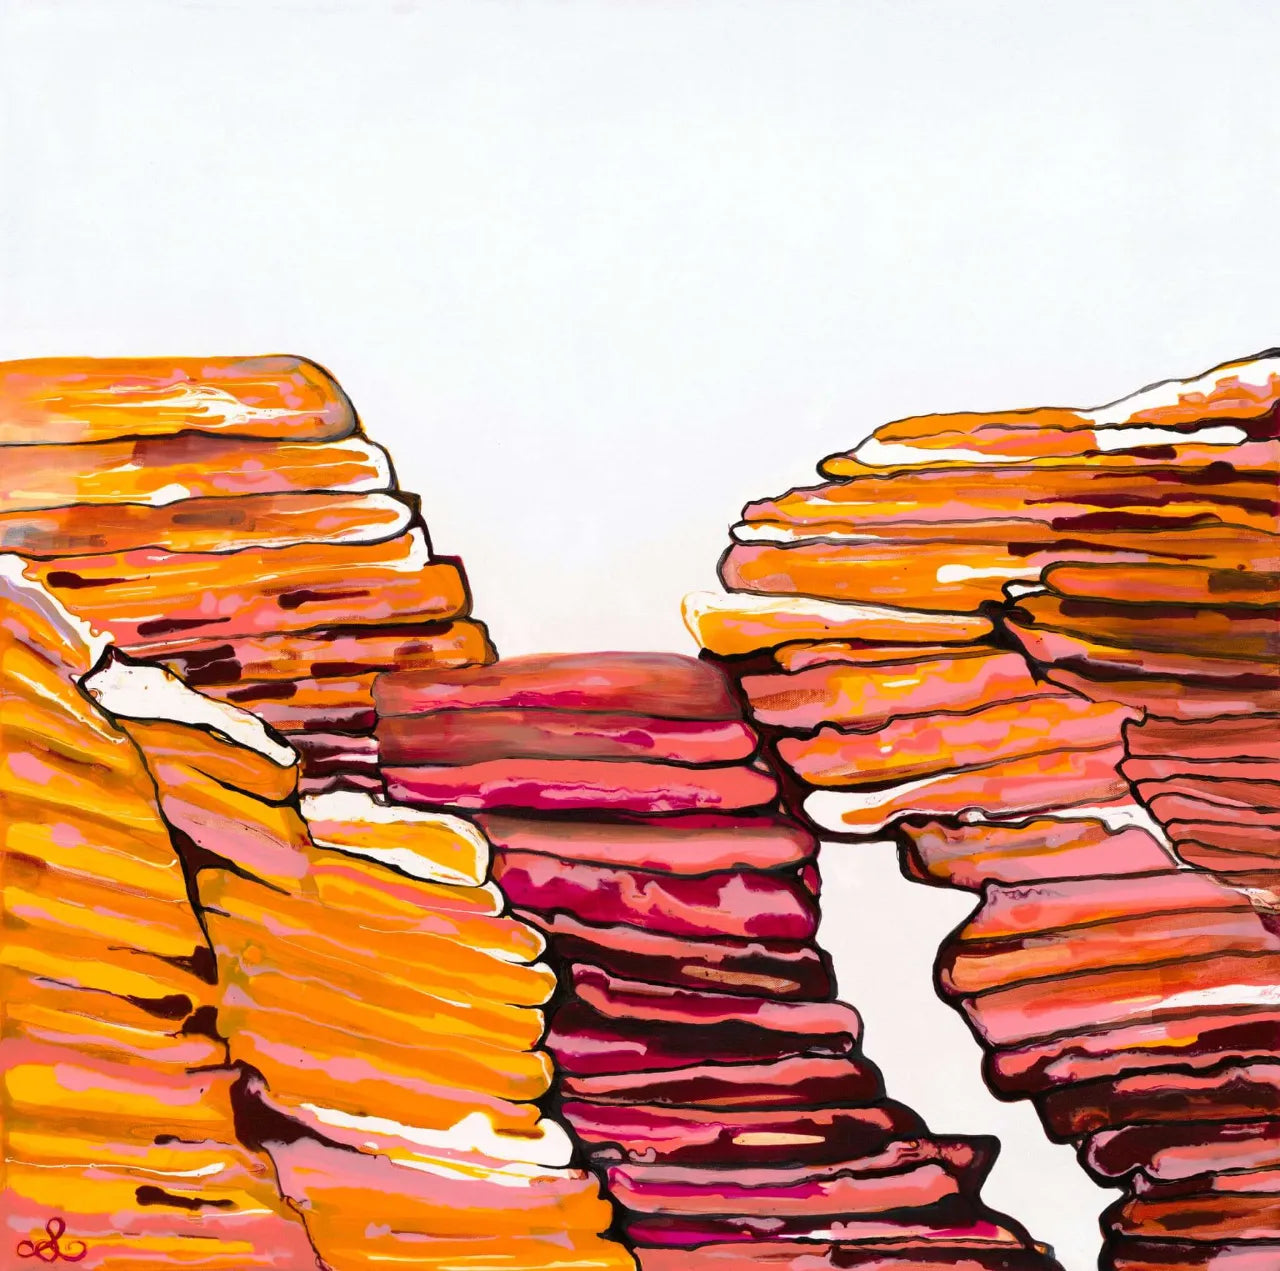 Abstract-Artwork-by-Sung-Lee-Nature-Series-New-Zealand-Pancake-Rocks-Original-Painting-Canvas